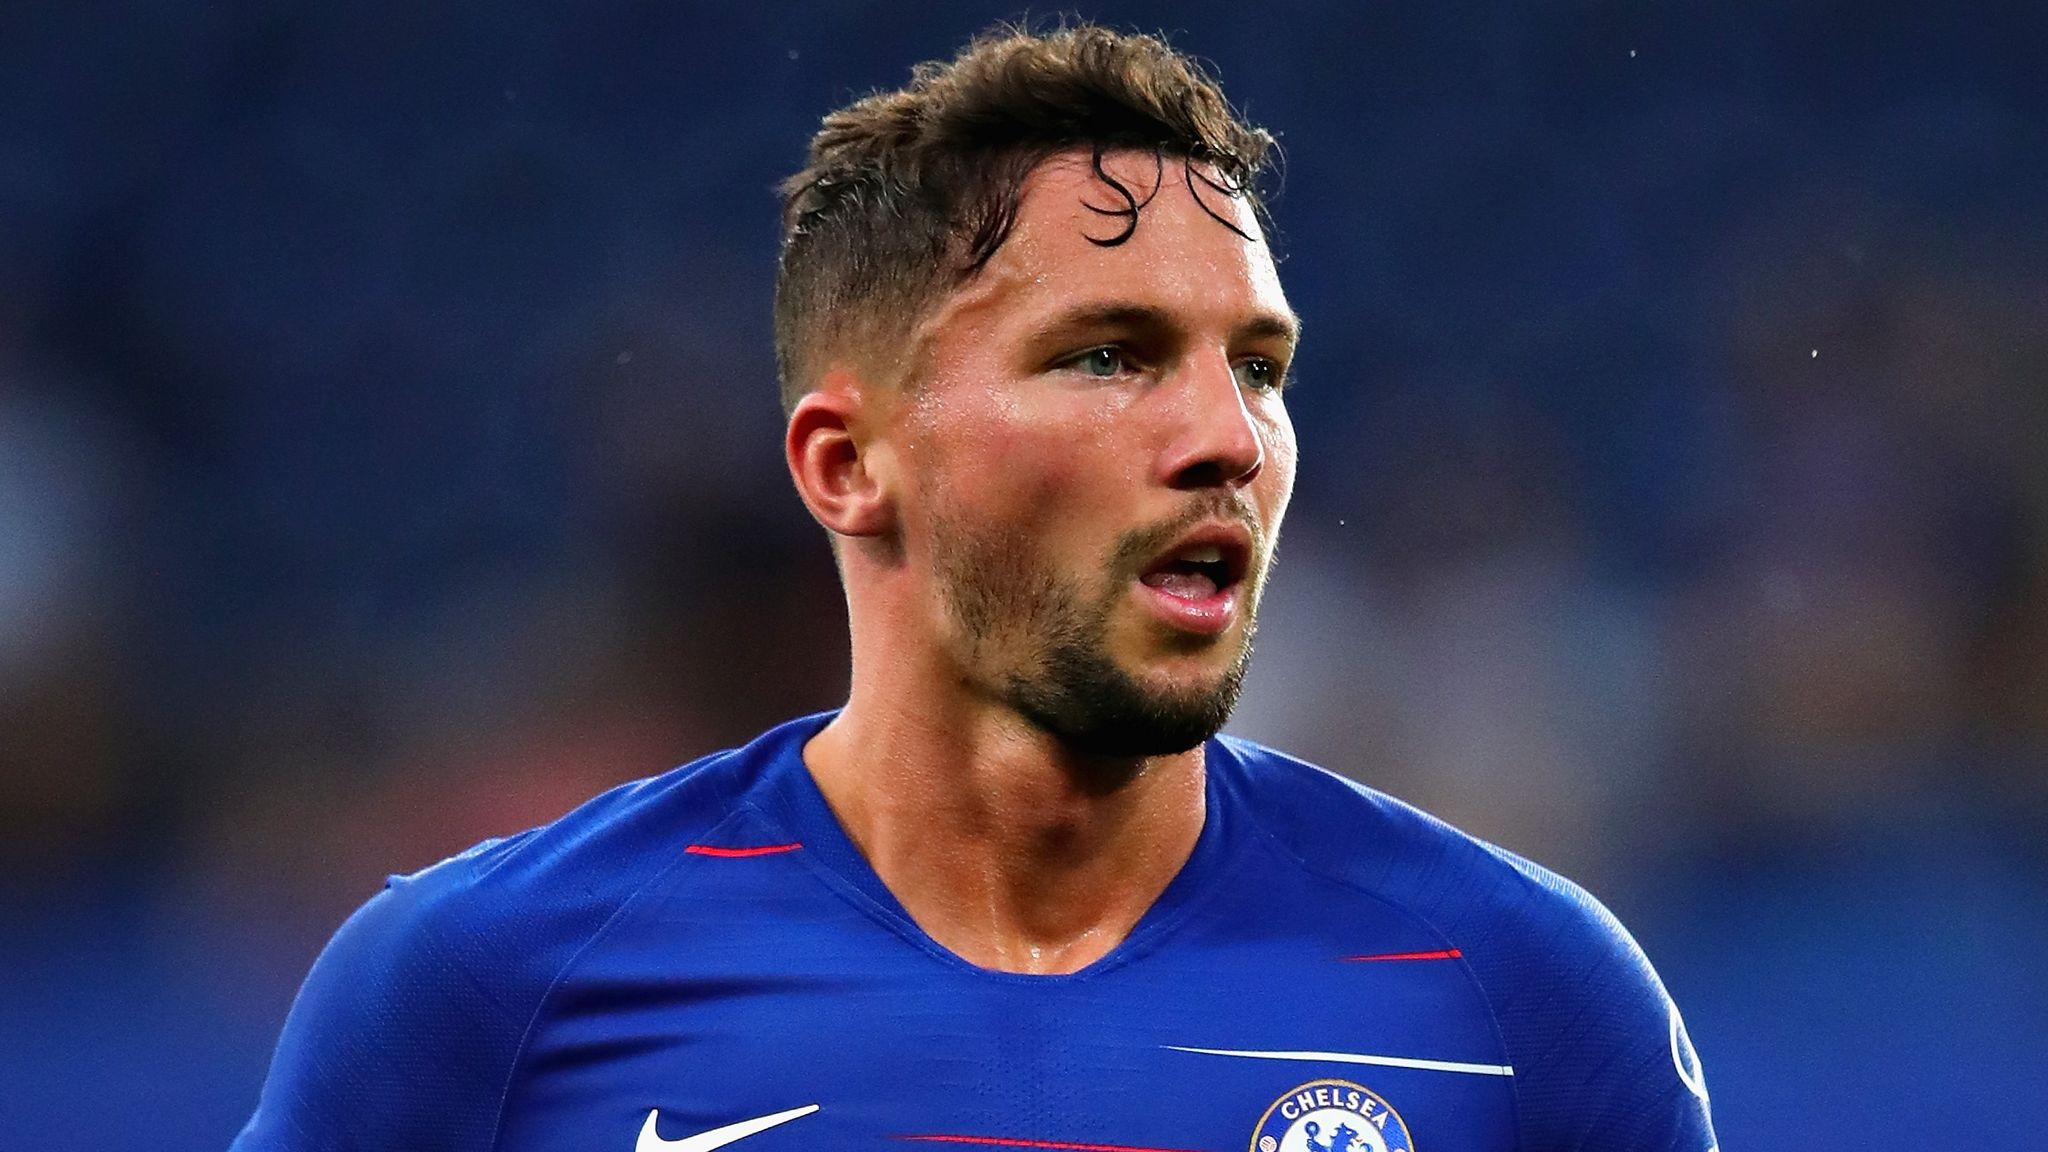 Premier League Champion Of Leicester Danny Drinkwater Retires At 33